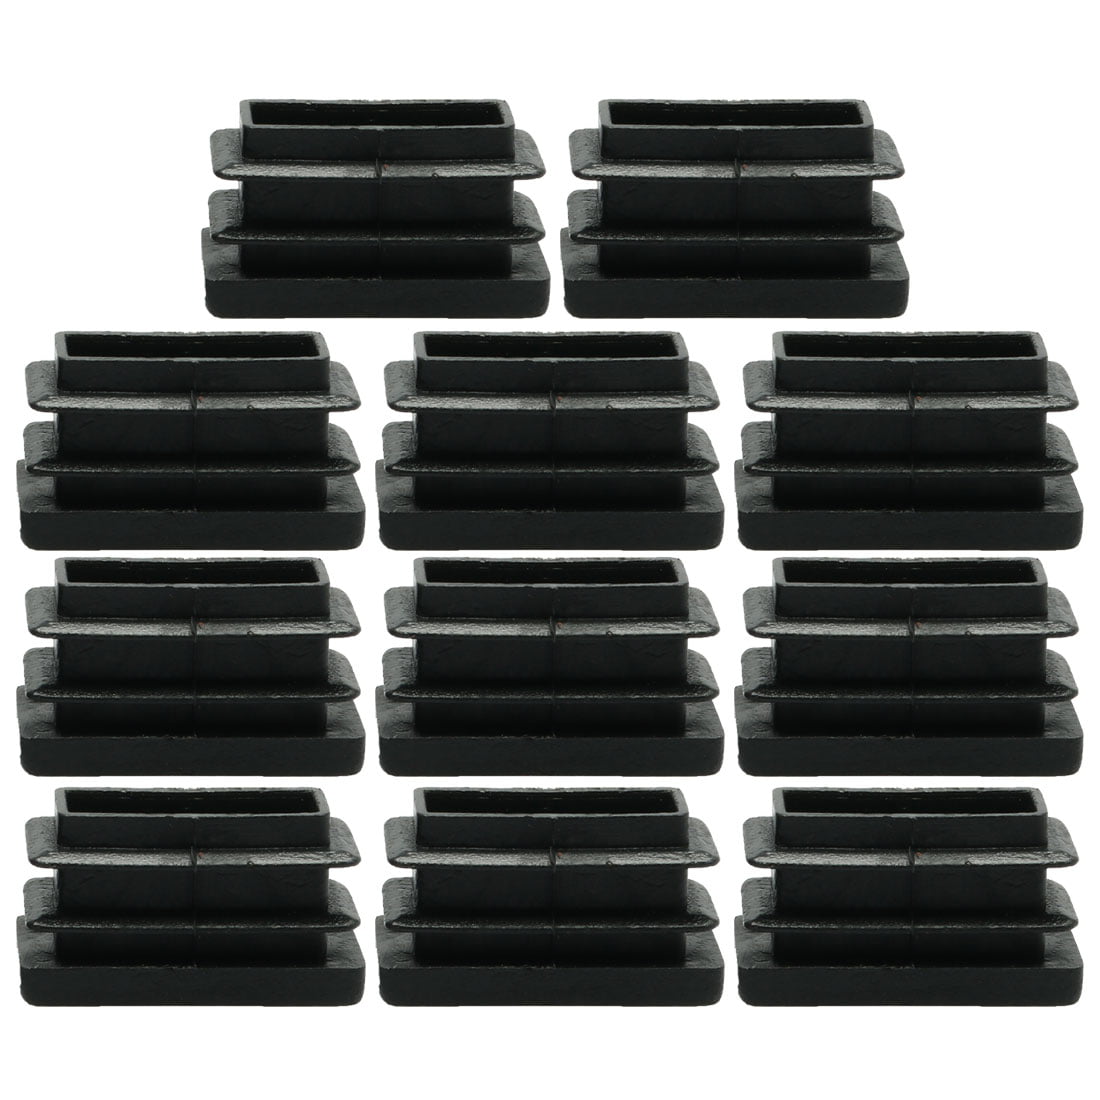 uxcell 40pcs Plastic Rectangle 20 x 80mm Tube Inserts Pipe Tubing End Covers Caps Furniture Glide Floor Protector Black 